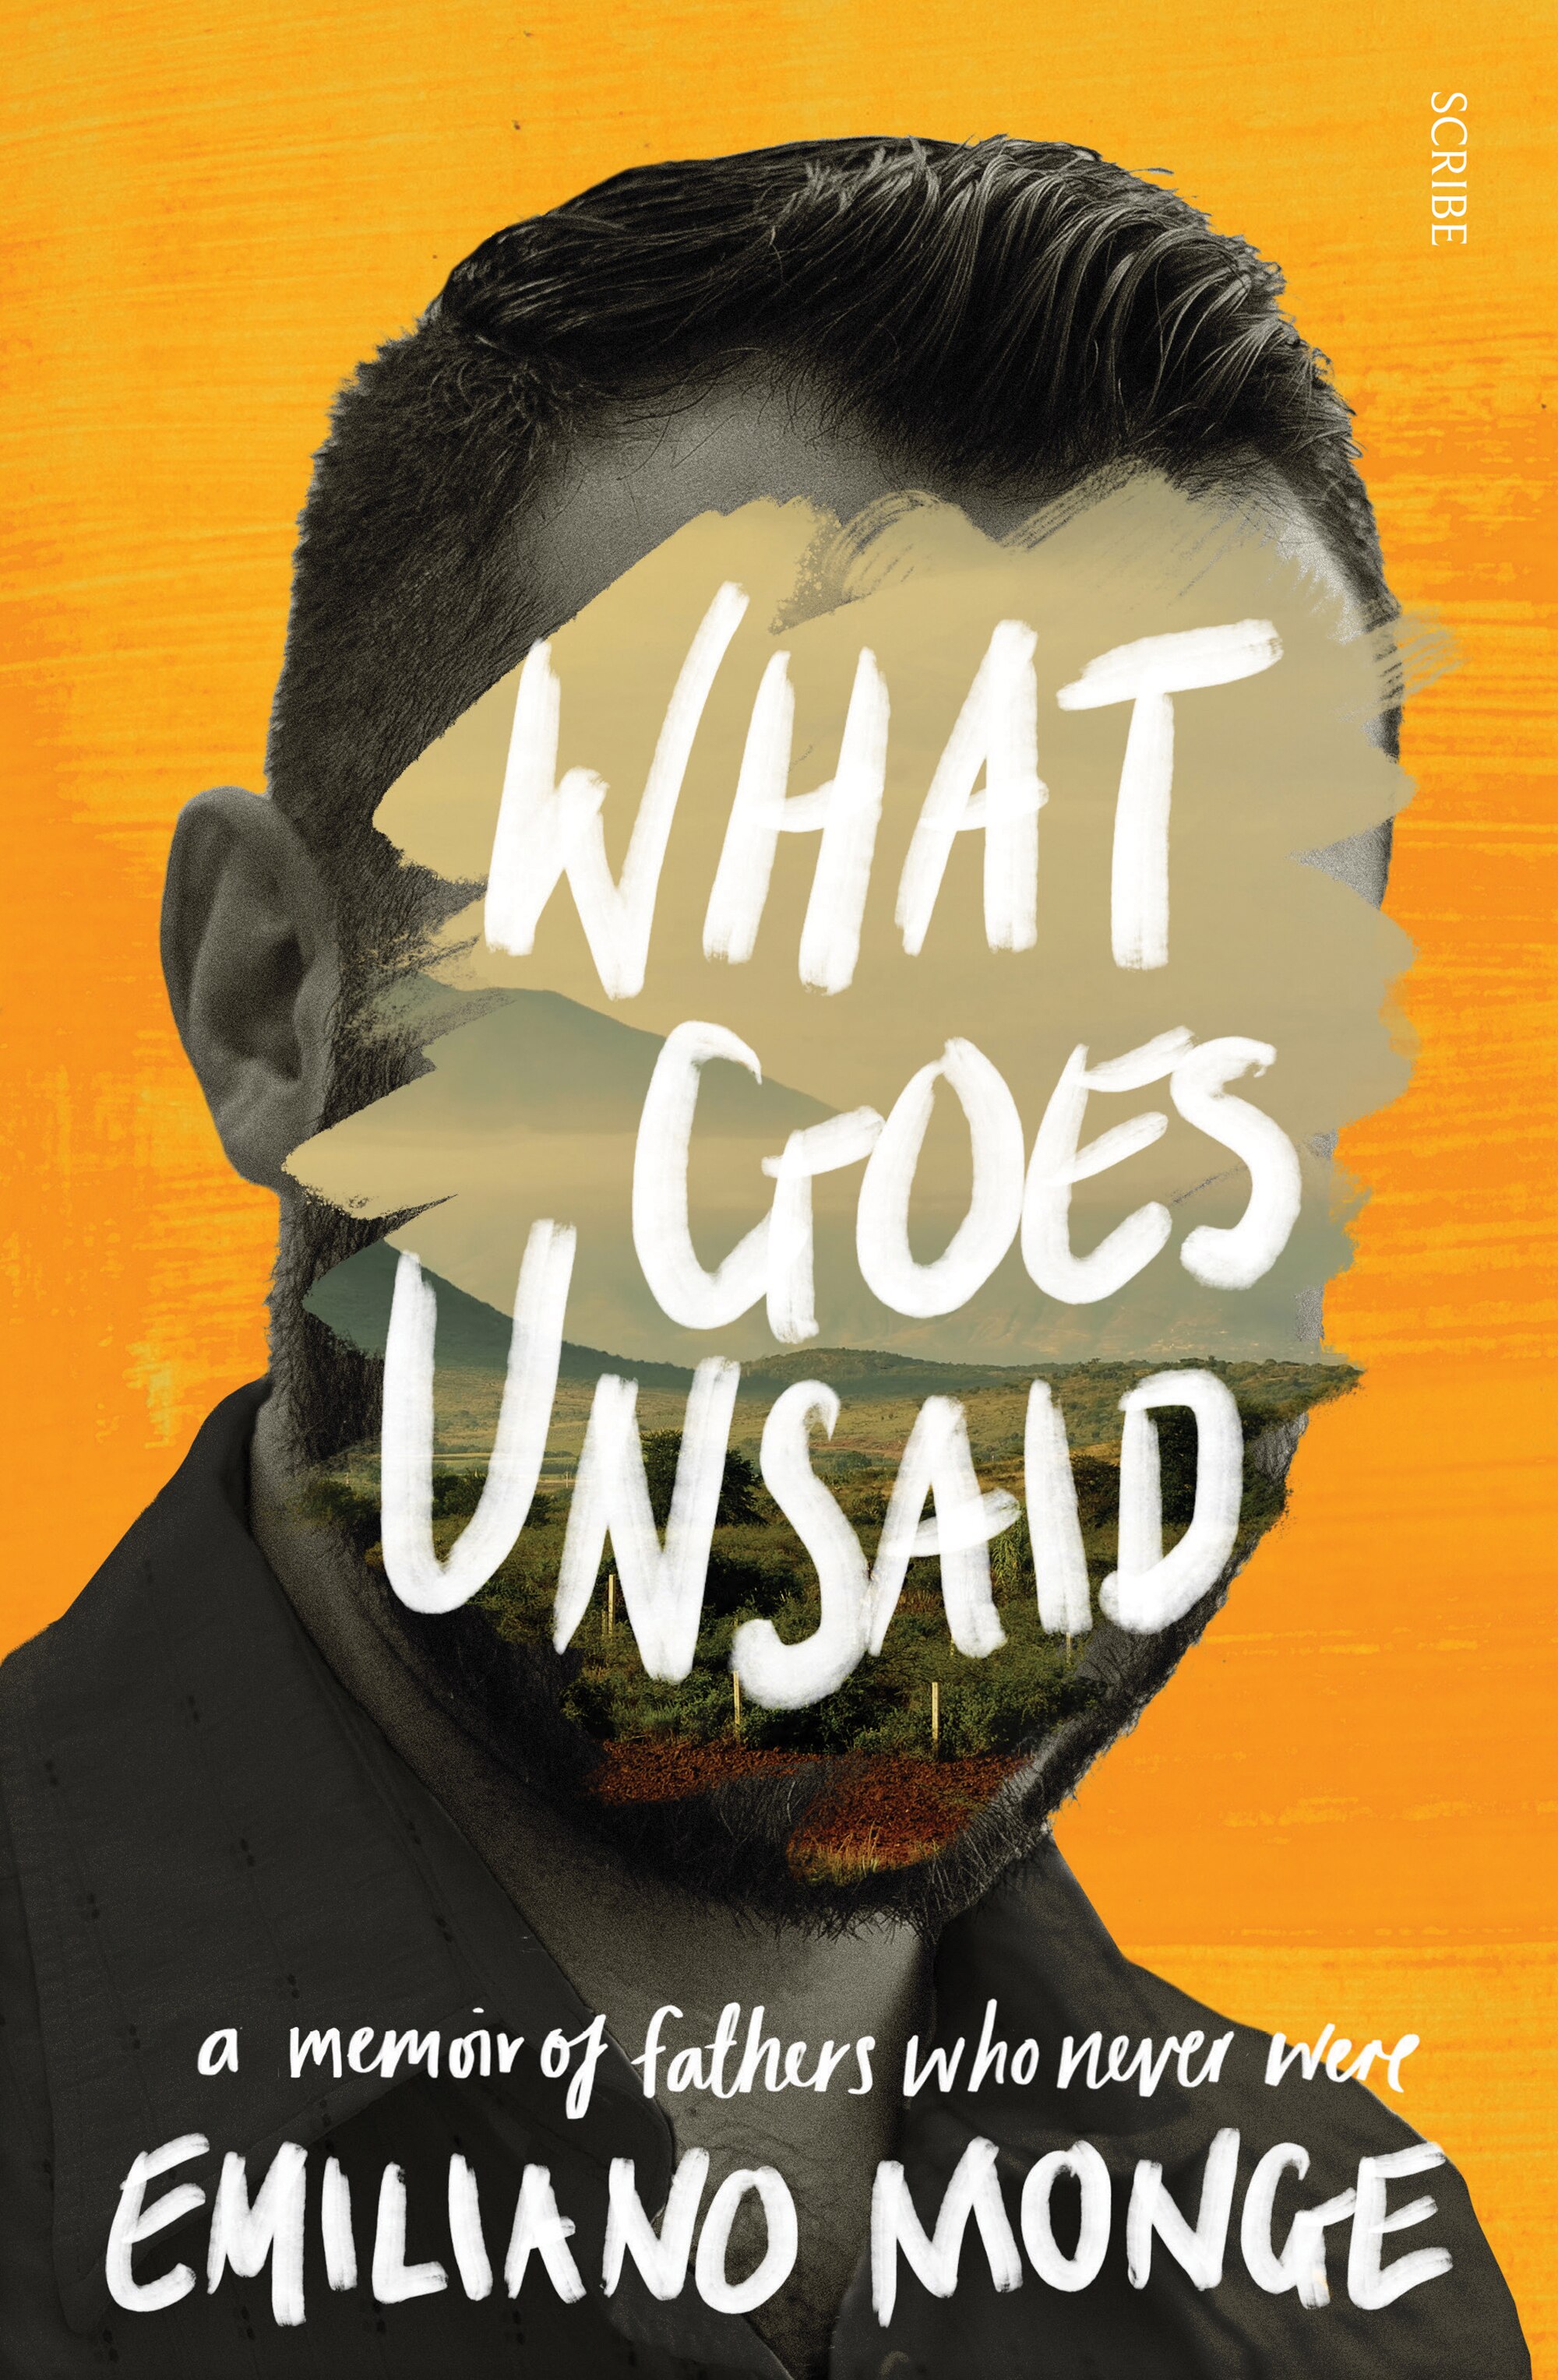 Cover of What Goes Unsaid by Emiliano Monge featuring an abstract image of man's face with a landscape covering his features